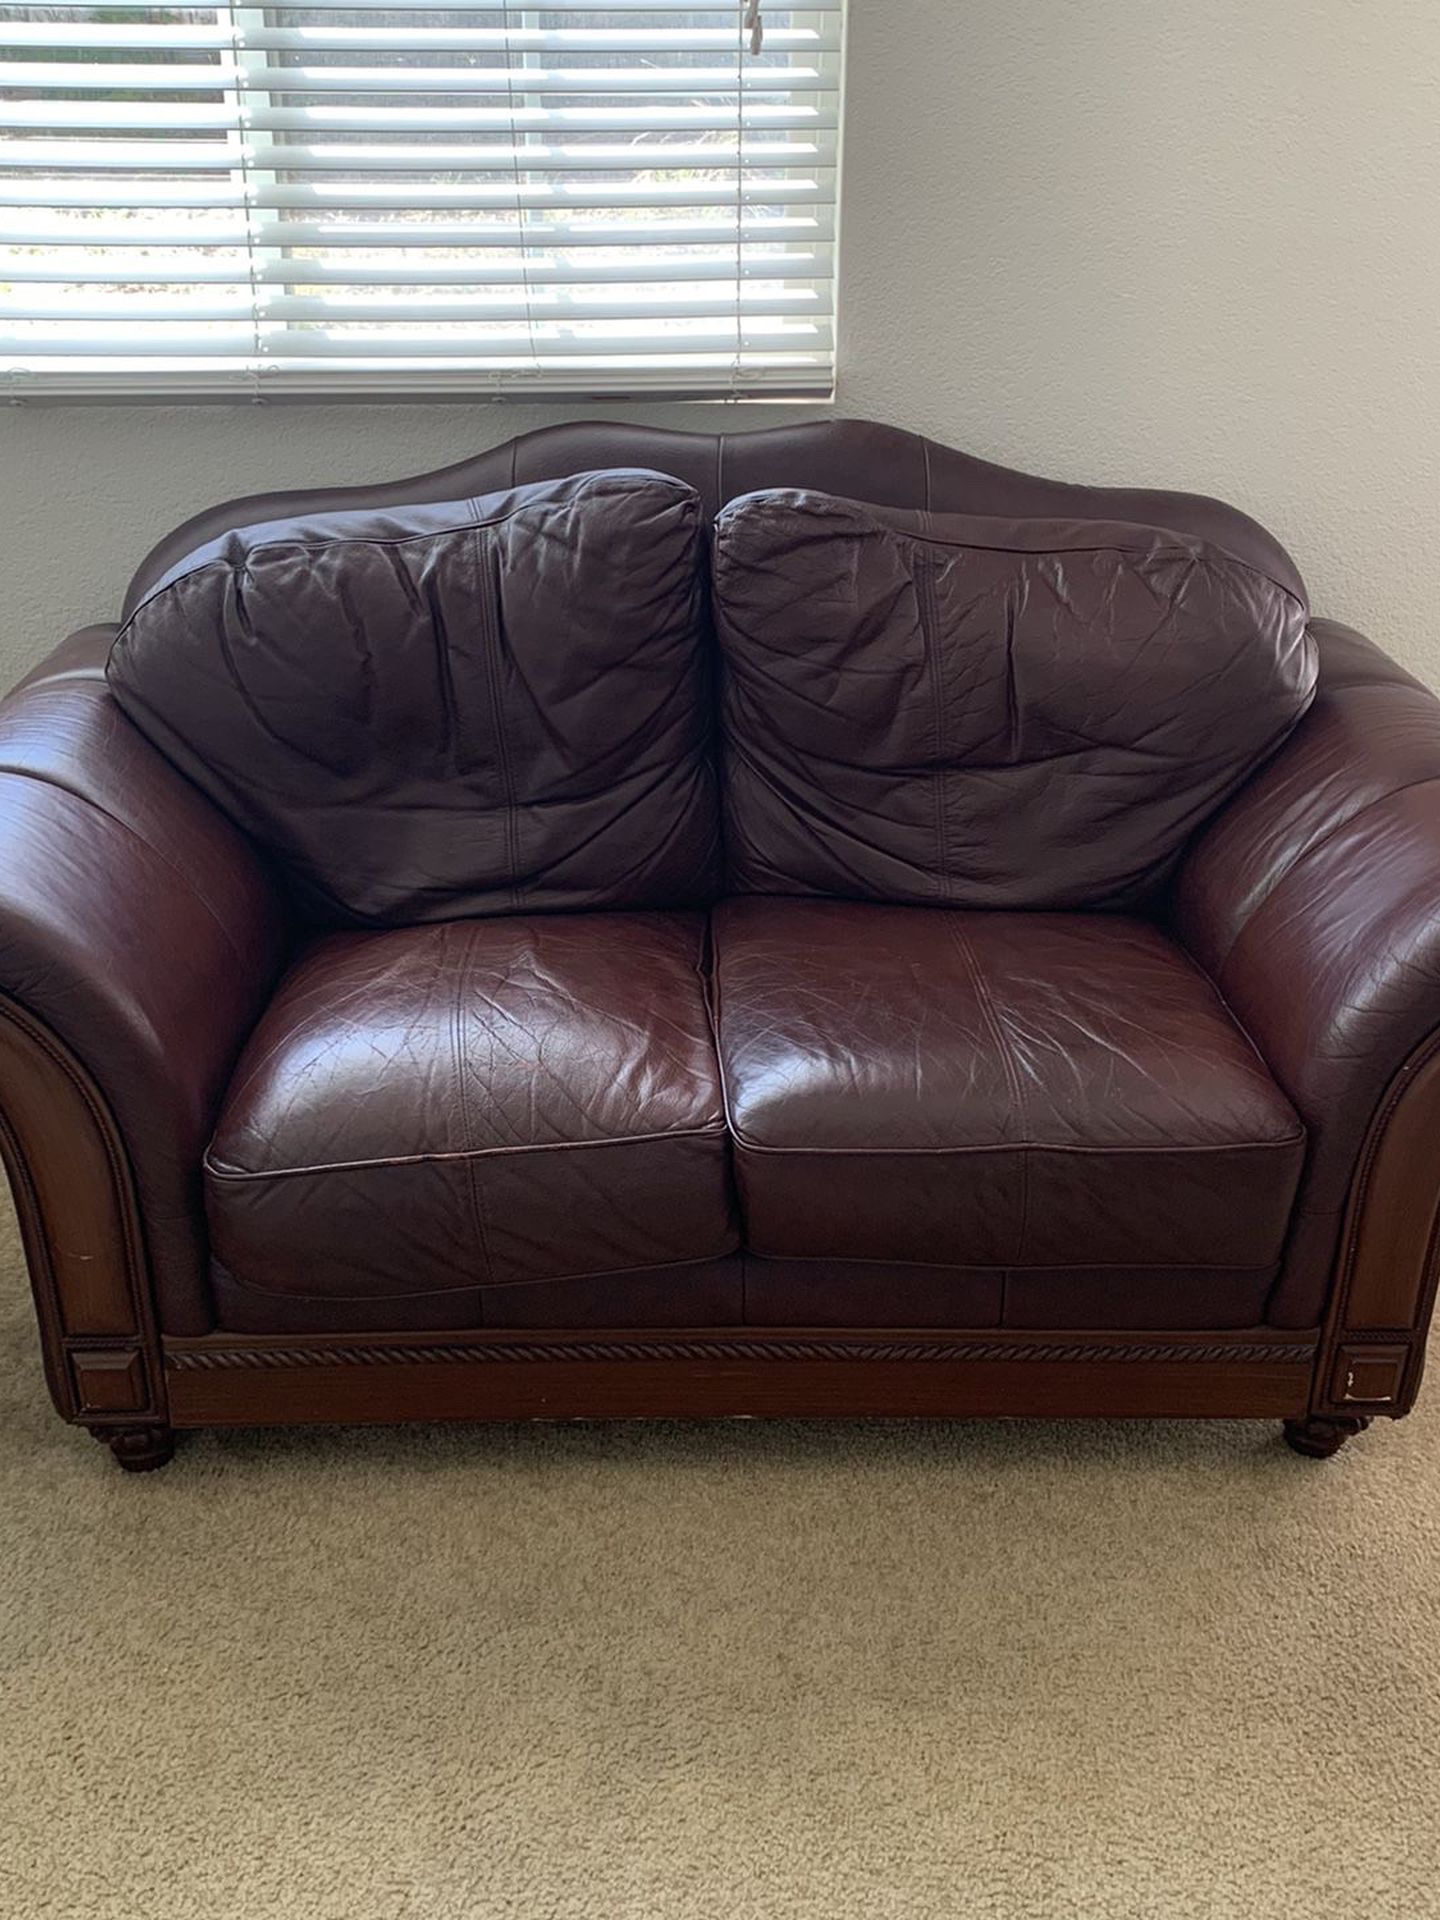 Beautiful Wine Red Leather Love Seat.